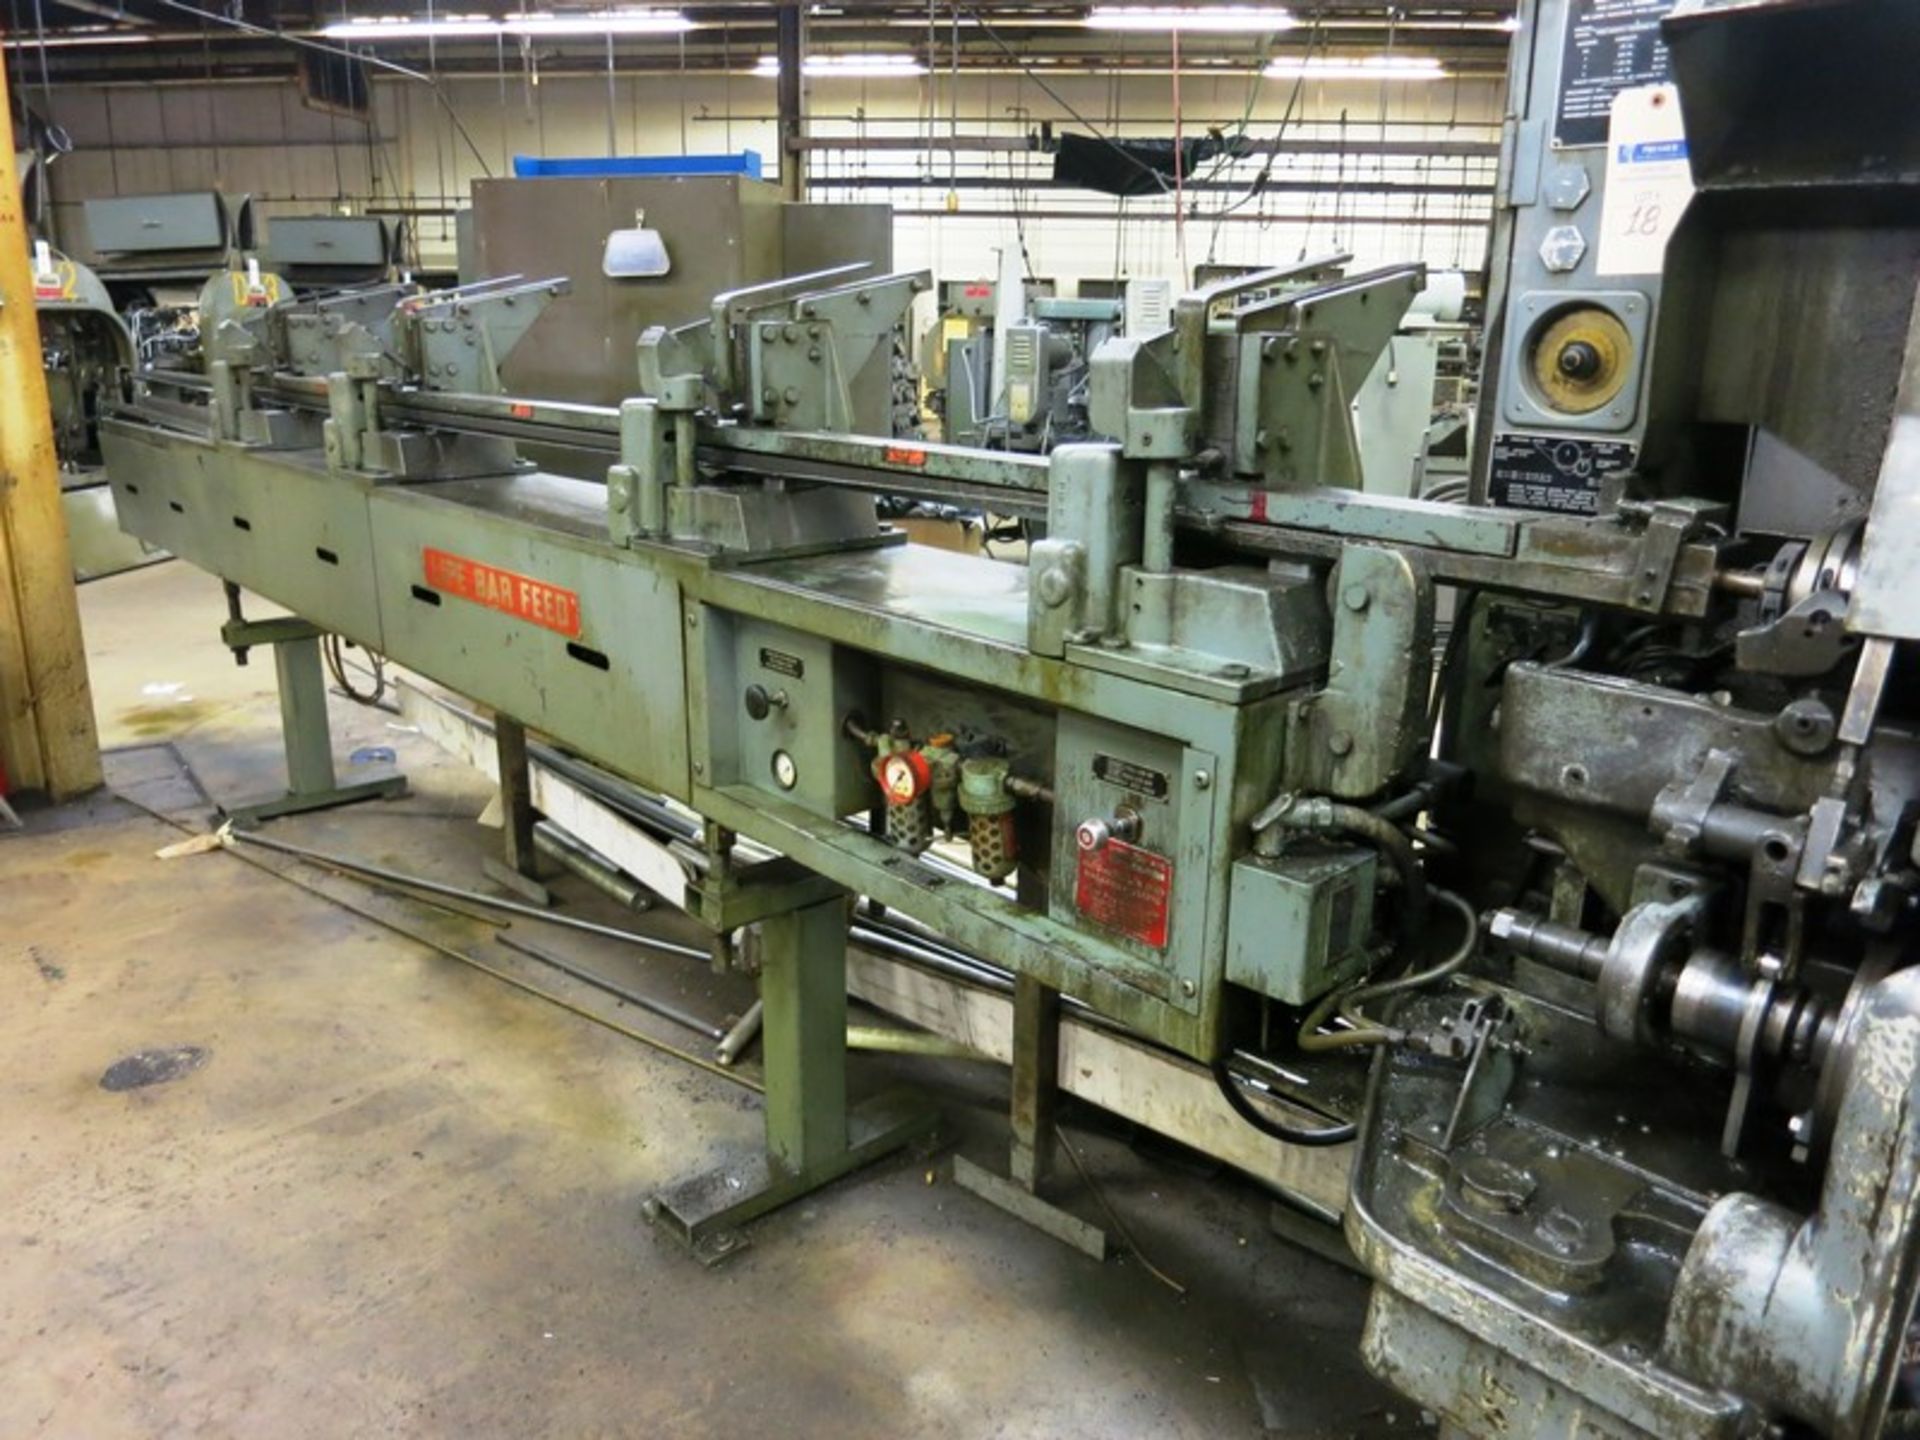 1 1/4" Brown and Sharpe Model #2 Automatic Screw Machine, S/N 542-2-5564-1 1/4 - Image 3 of 3